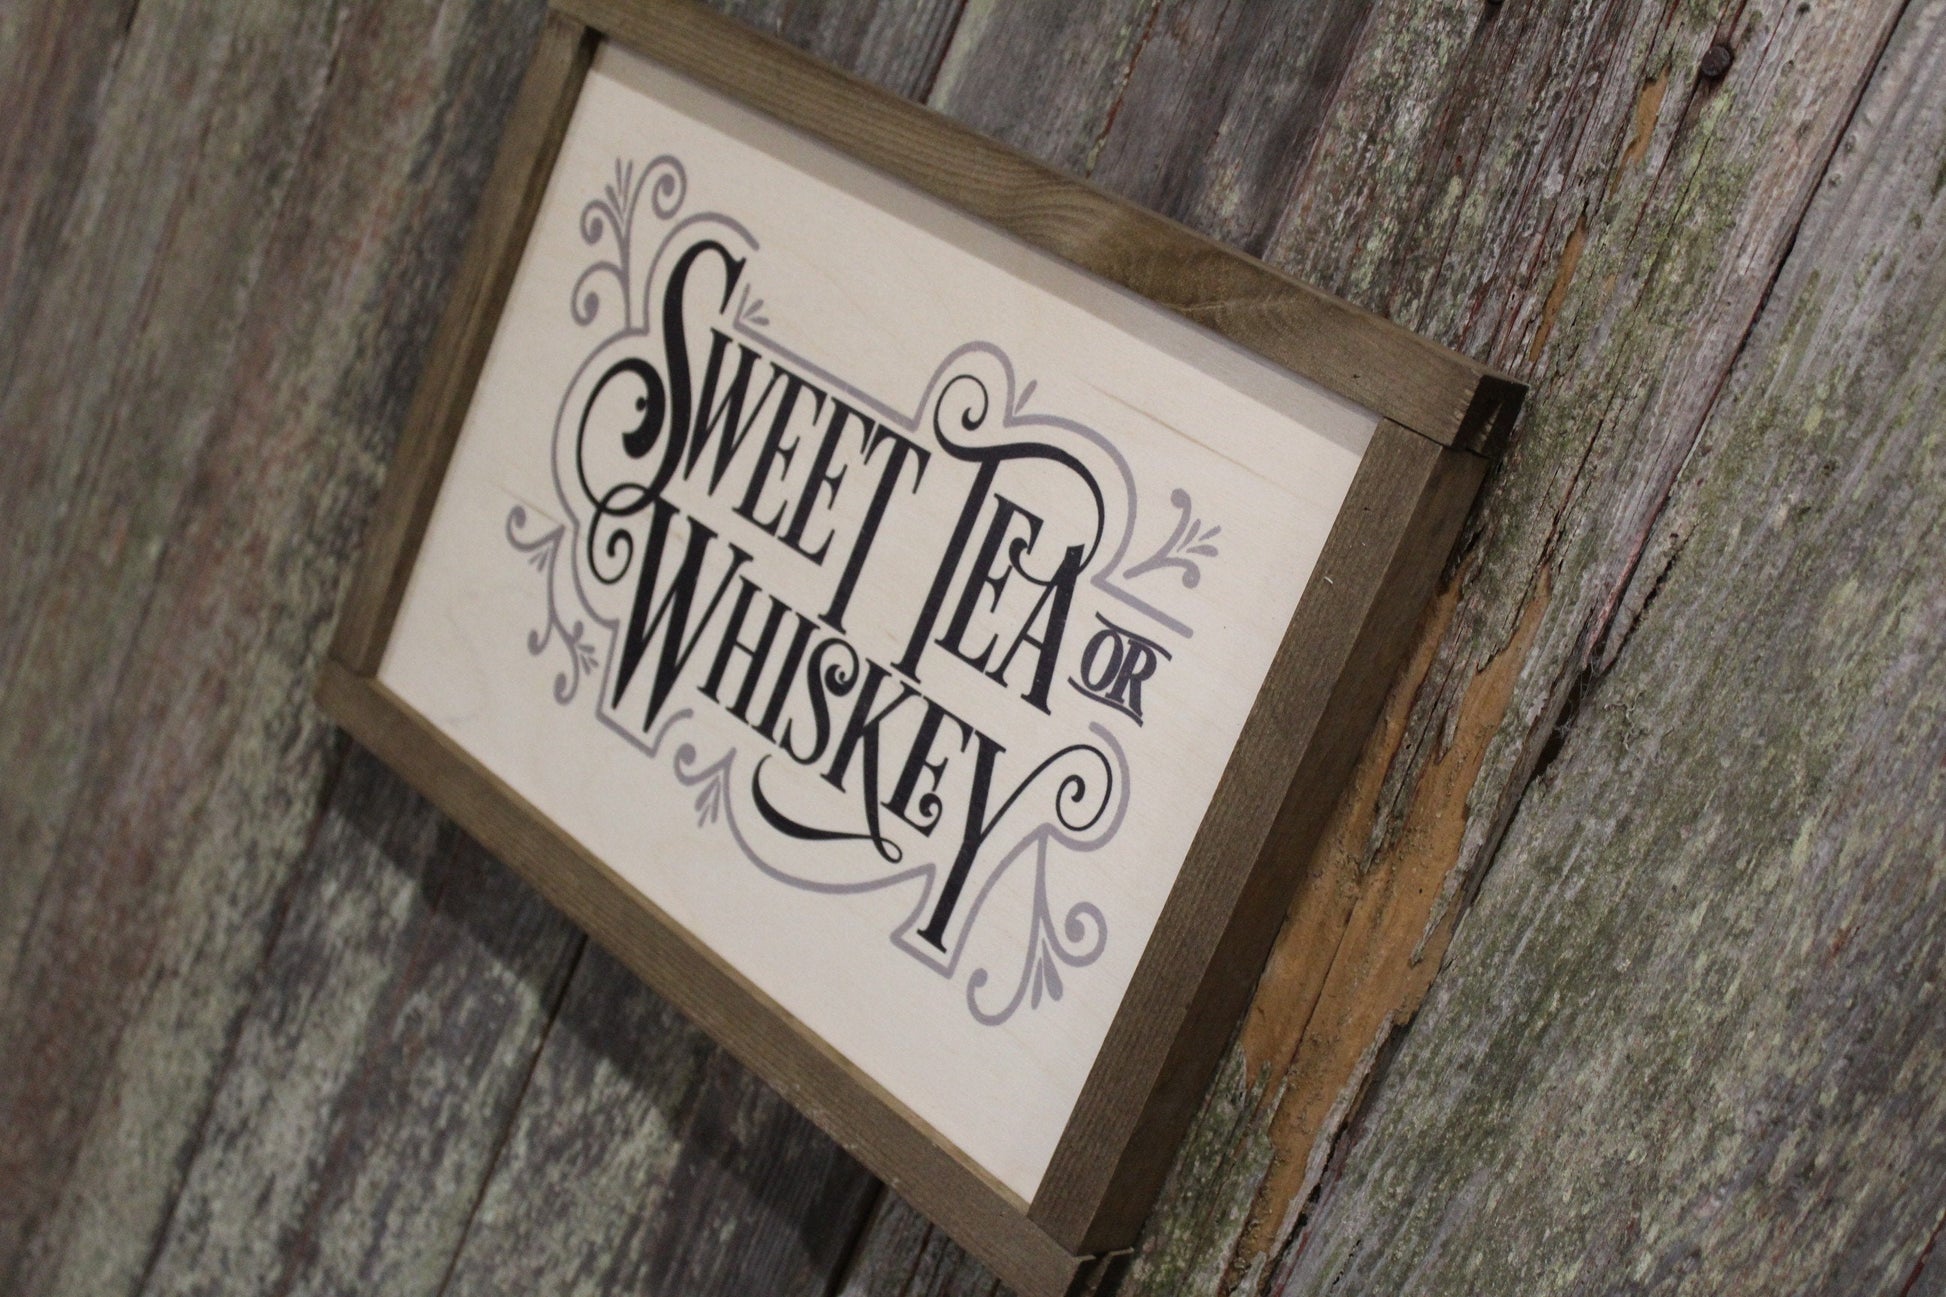 Sweet Tea or Whiskey Wood Sign Farmhouse Wall Decor Picture Print Primitive Rustic Barn Wood Script Text Kitchen Porch Sign Wood Frame